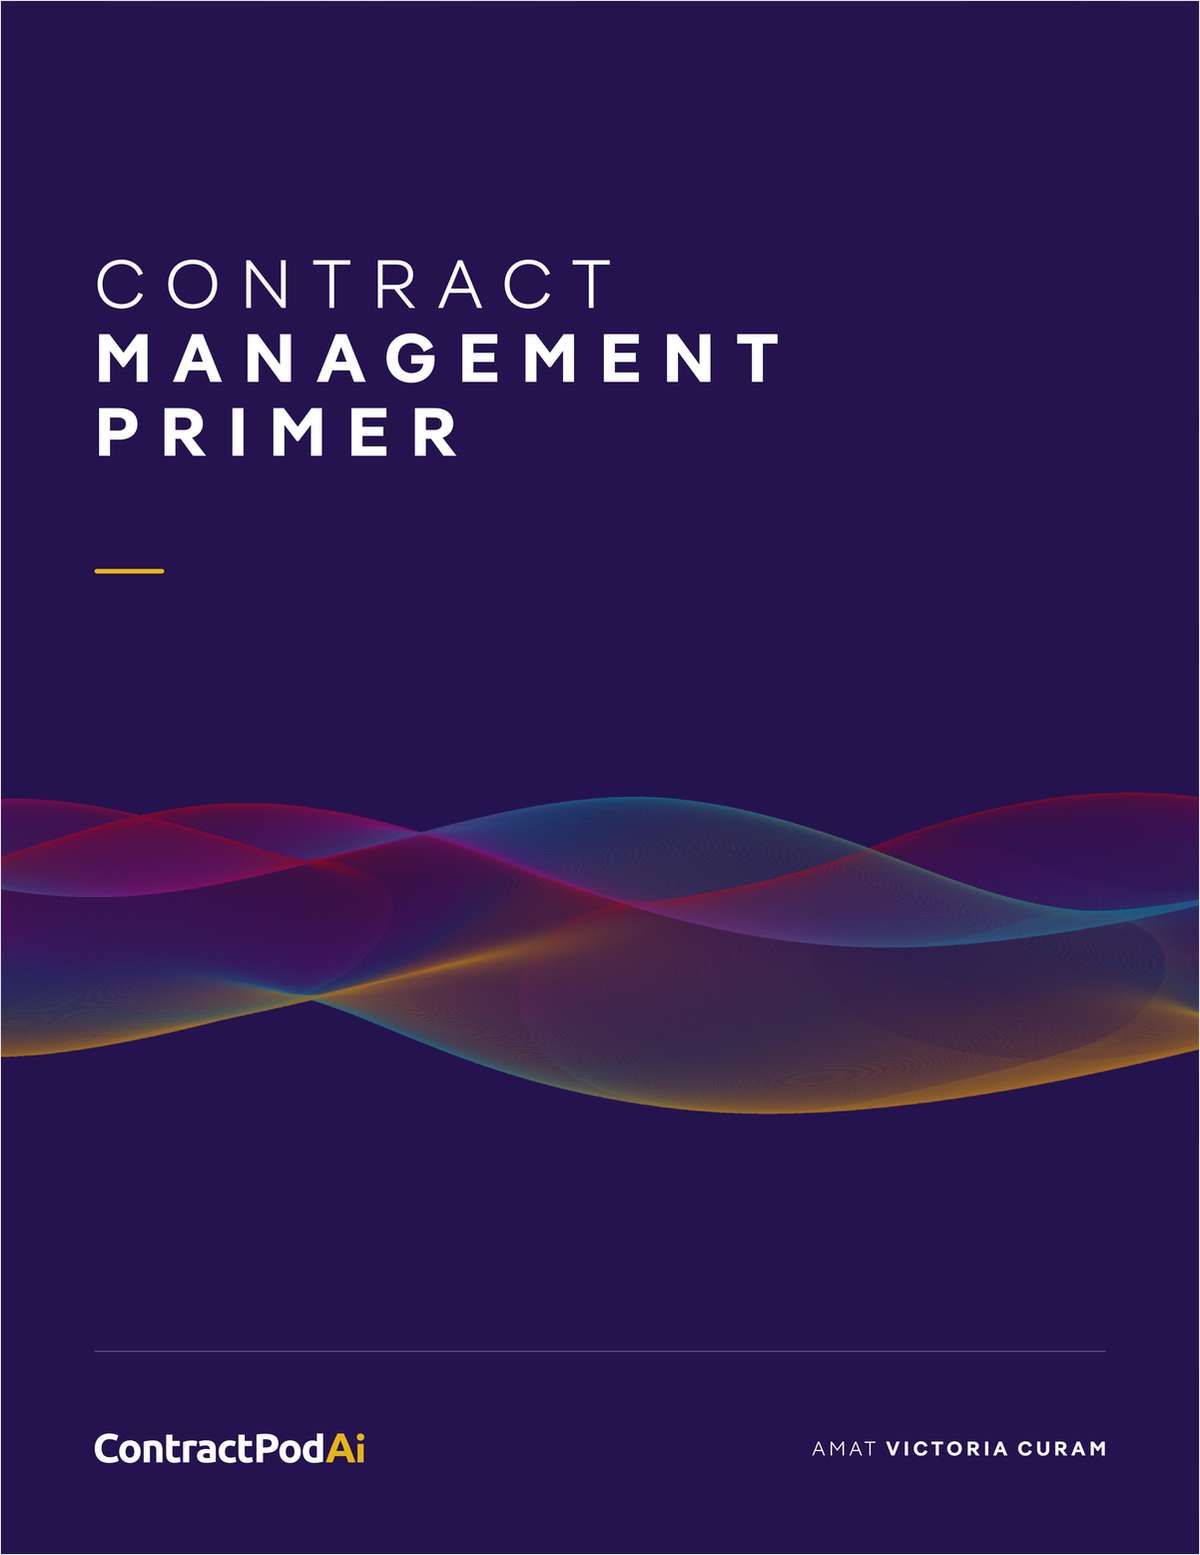 Considering a Contract Lifecycle Management (CLM) solution? GCs are typically tasked with determining if a system meets key objectives and will pay off for the organization. This in-depth guide answers all questions related to CLM solutions, including those around their value and procurement.